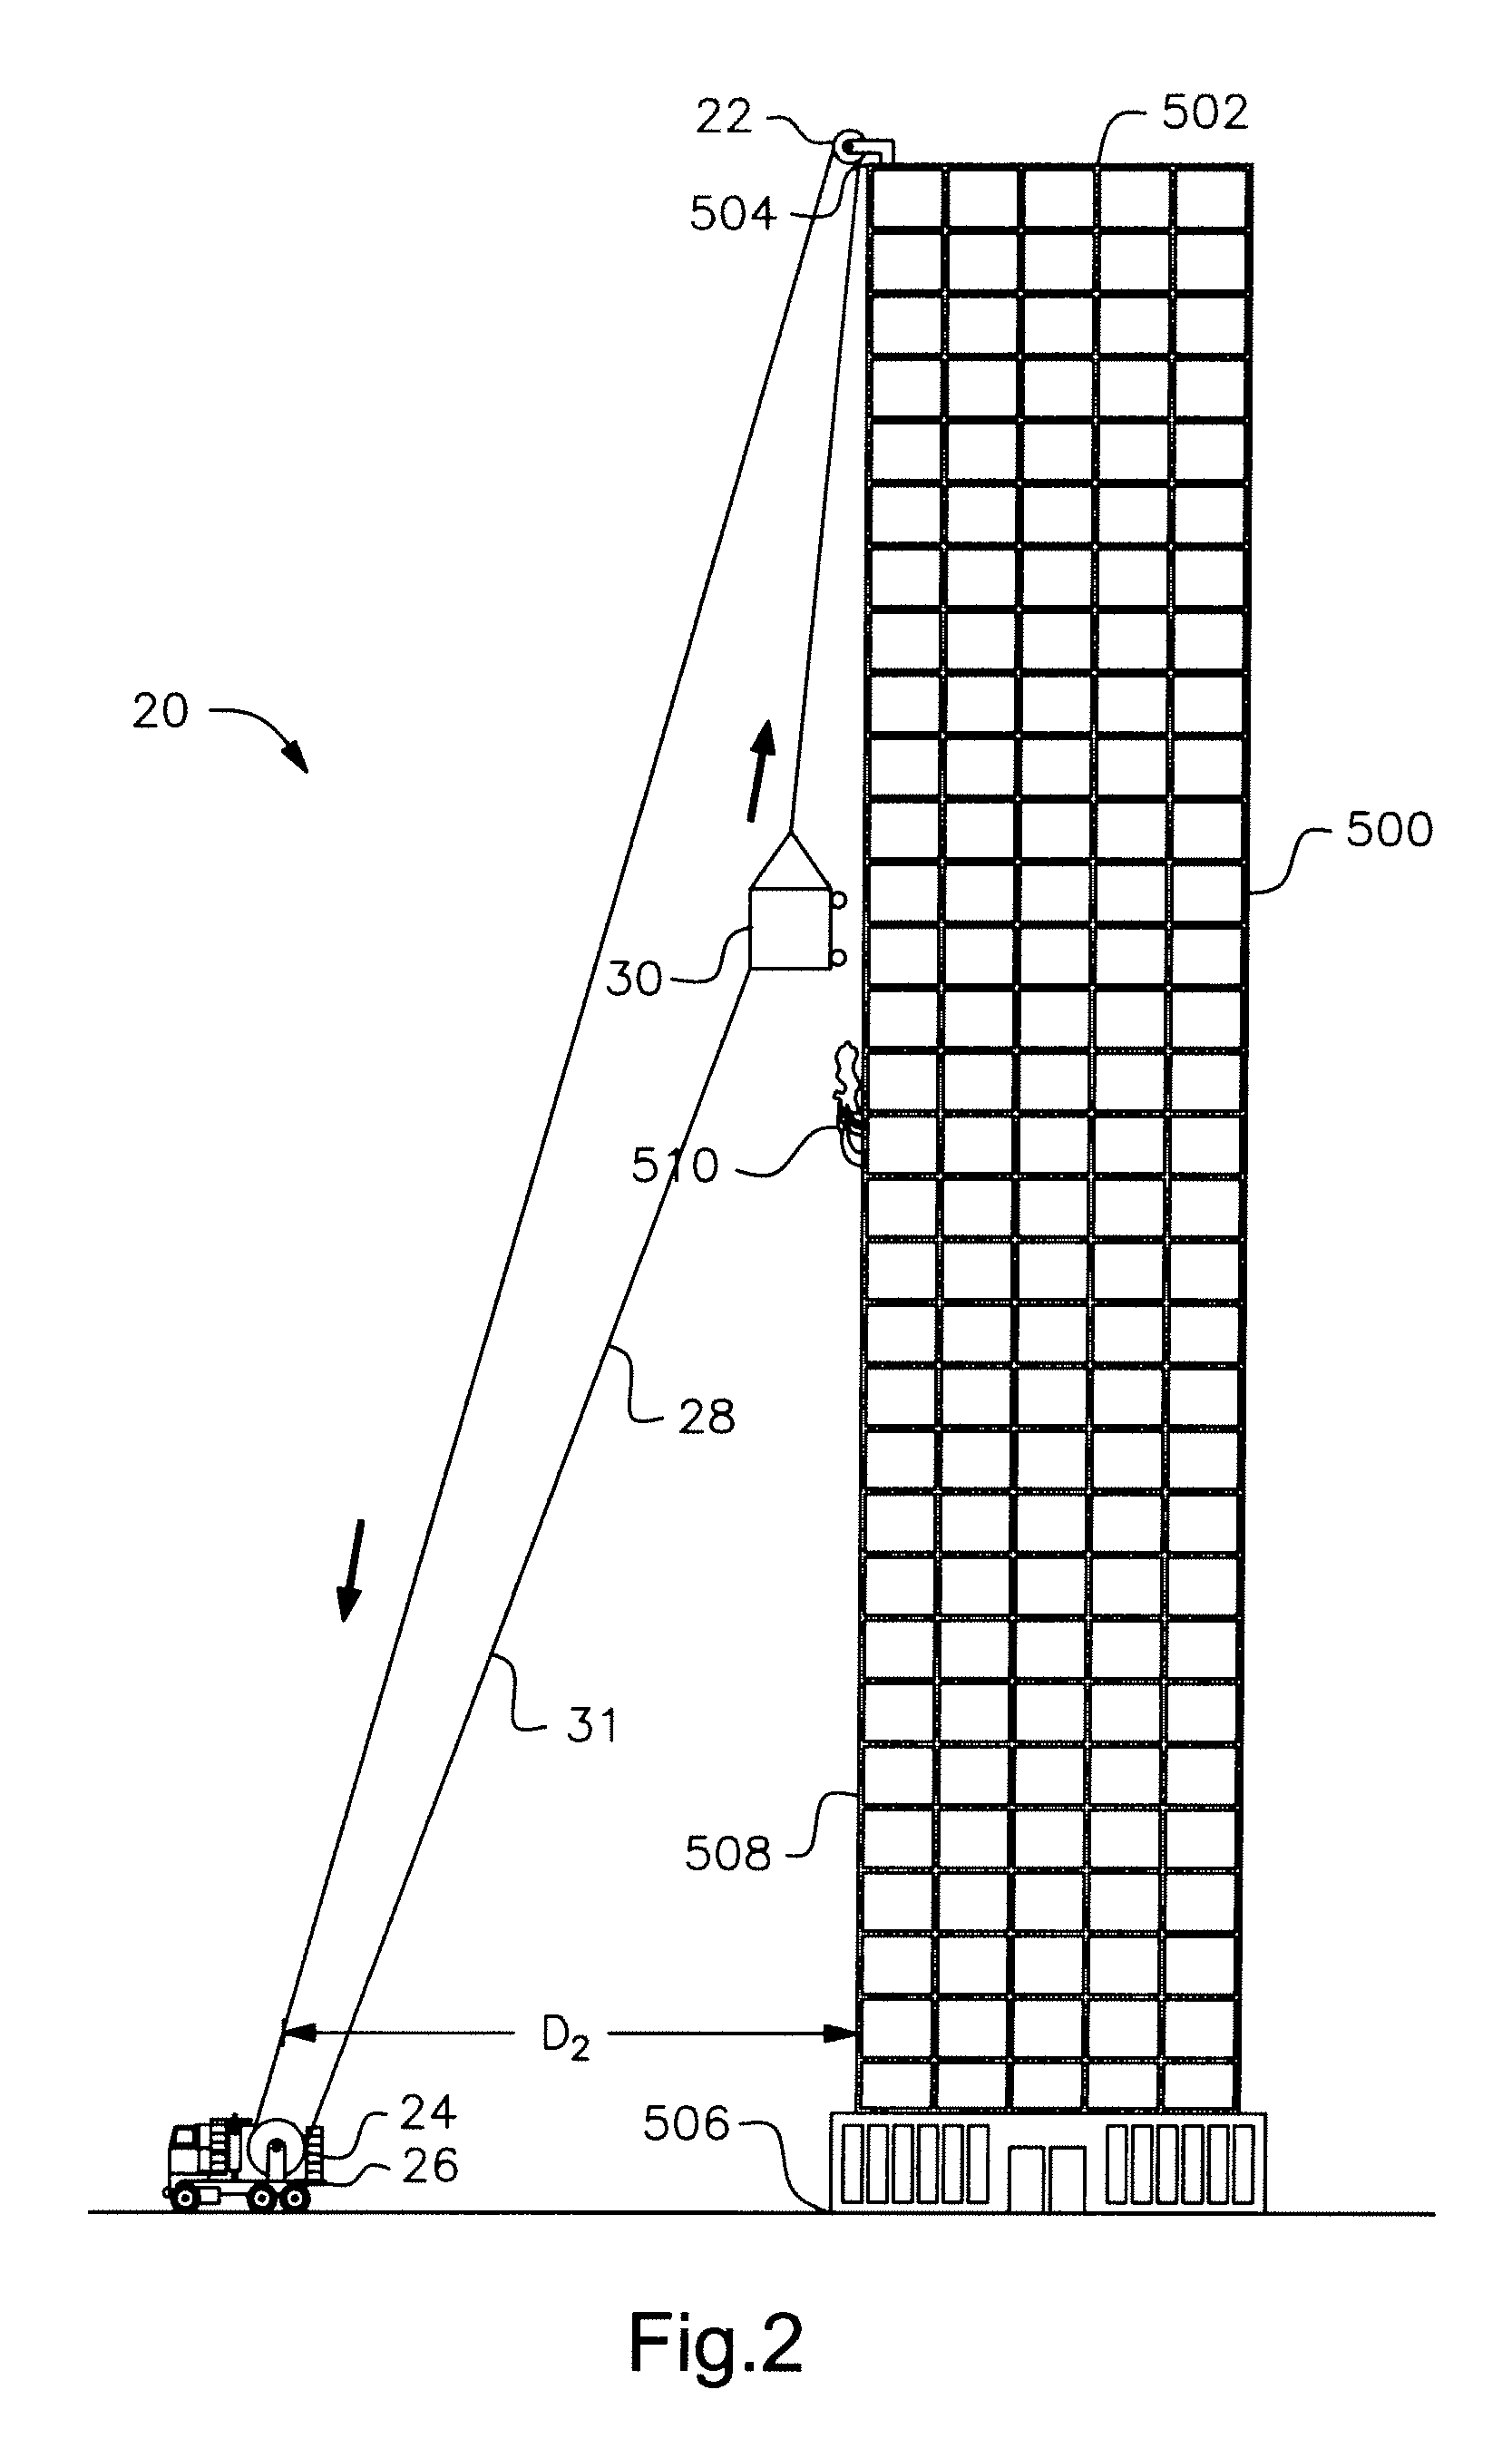 Method and apparatus for reaching from outside an upper level of a tall structure